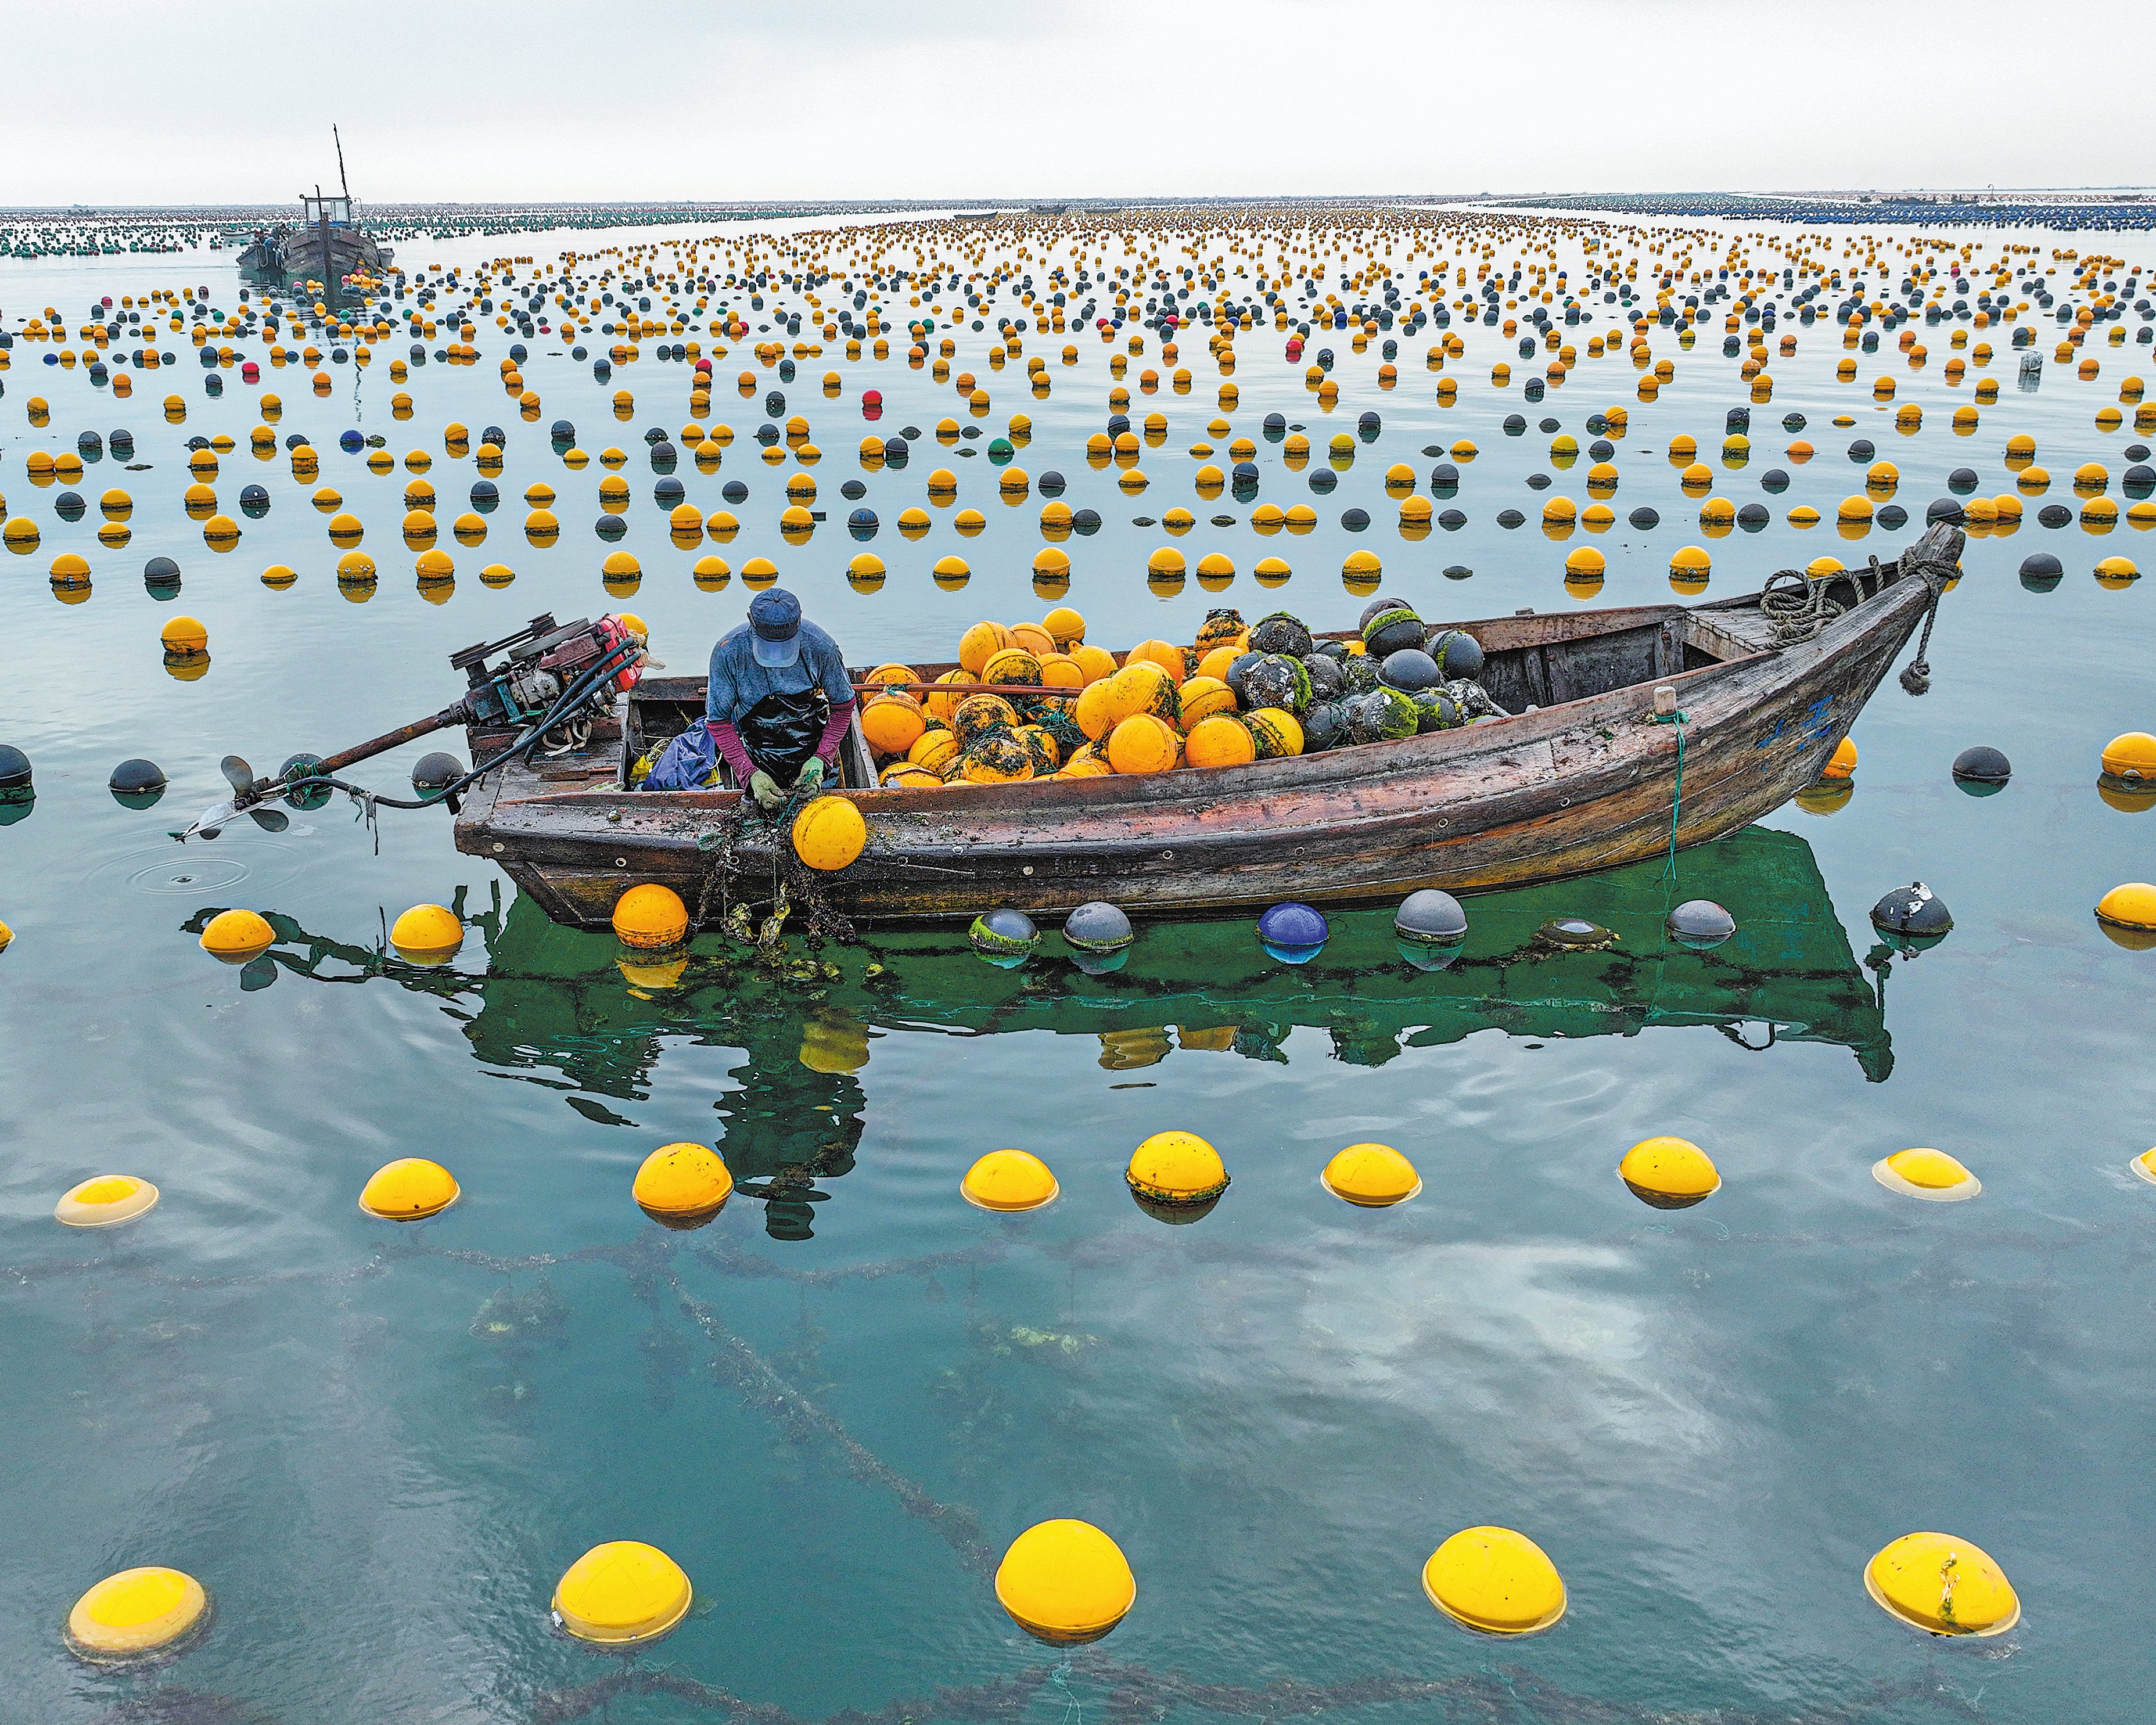 A fisherman checks buoys made from eco-friendly materials that pose no harm to the ocean environment, at an aquaculture farm in Rongcheng, Shandong province